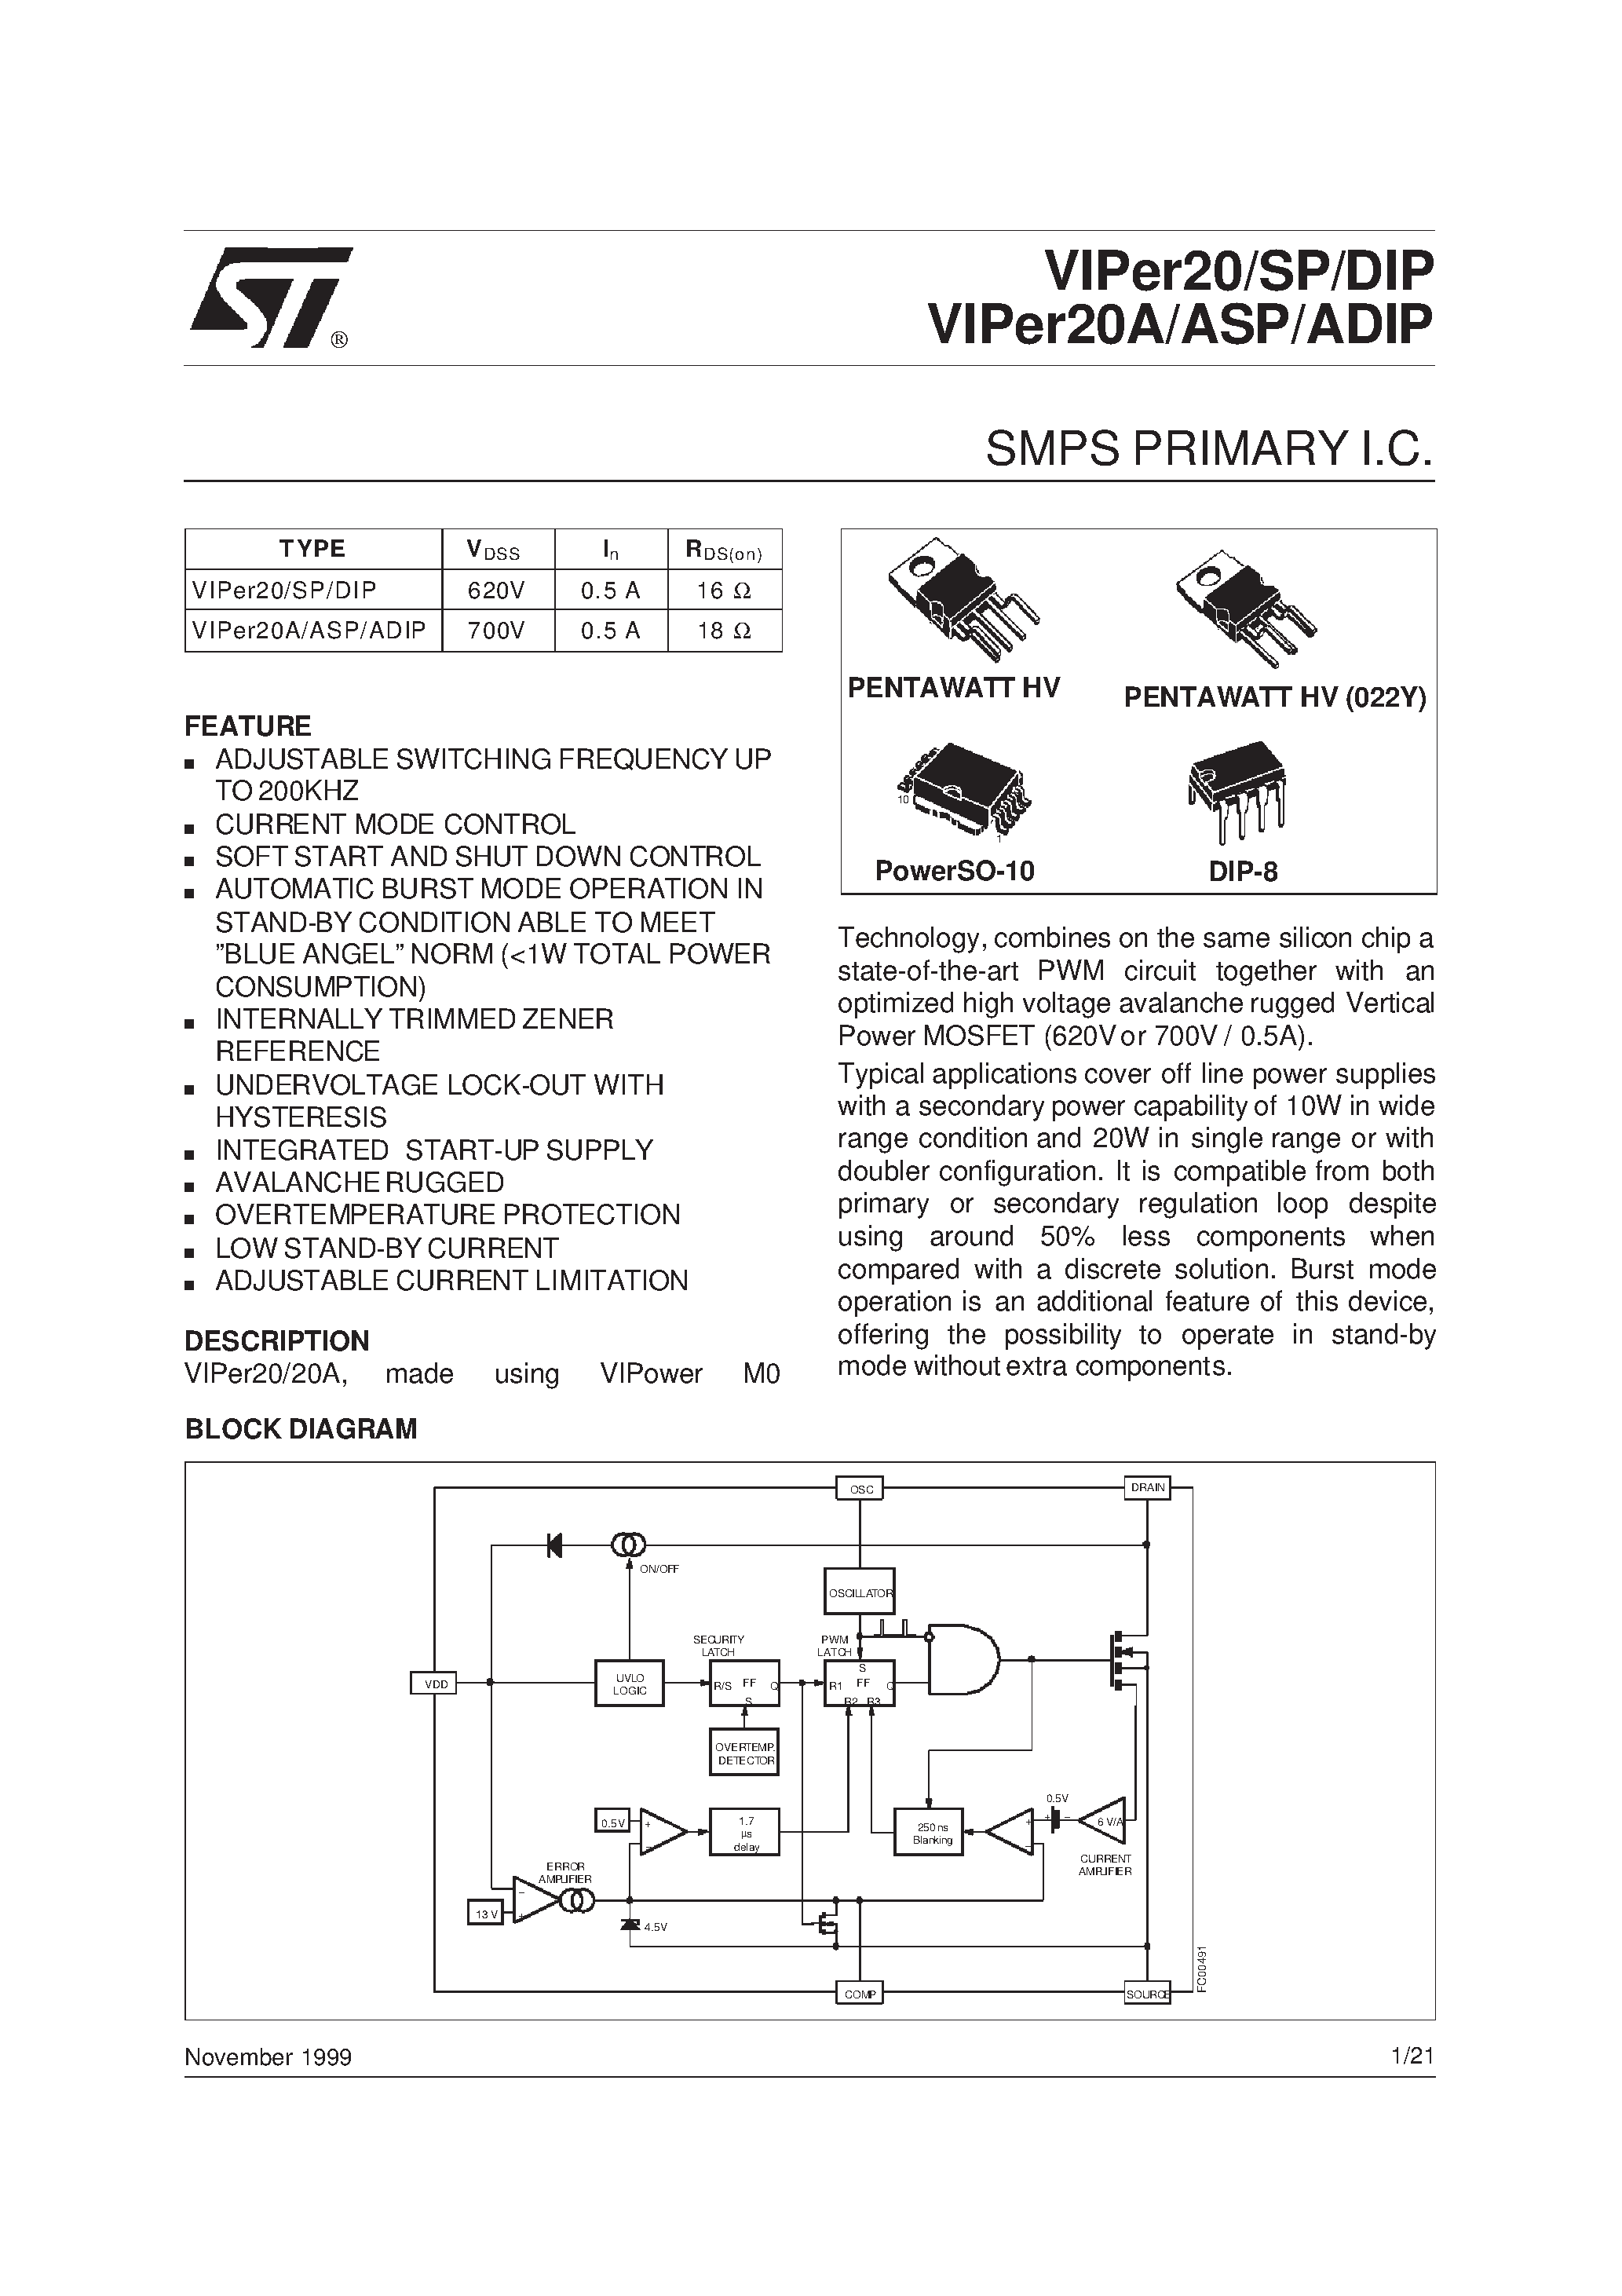 Datasheet VIPER20 - SMPS PRIMARY I.C. page 1